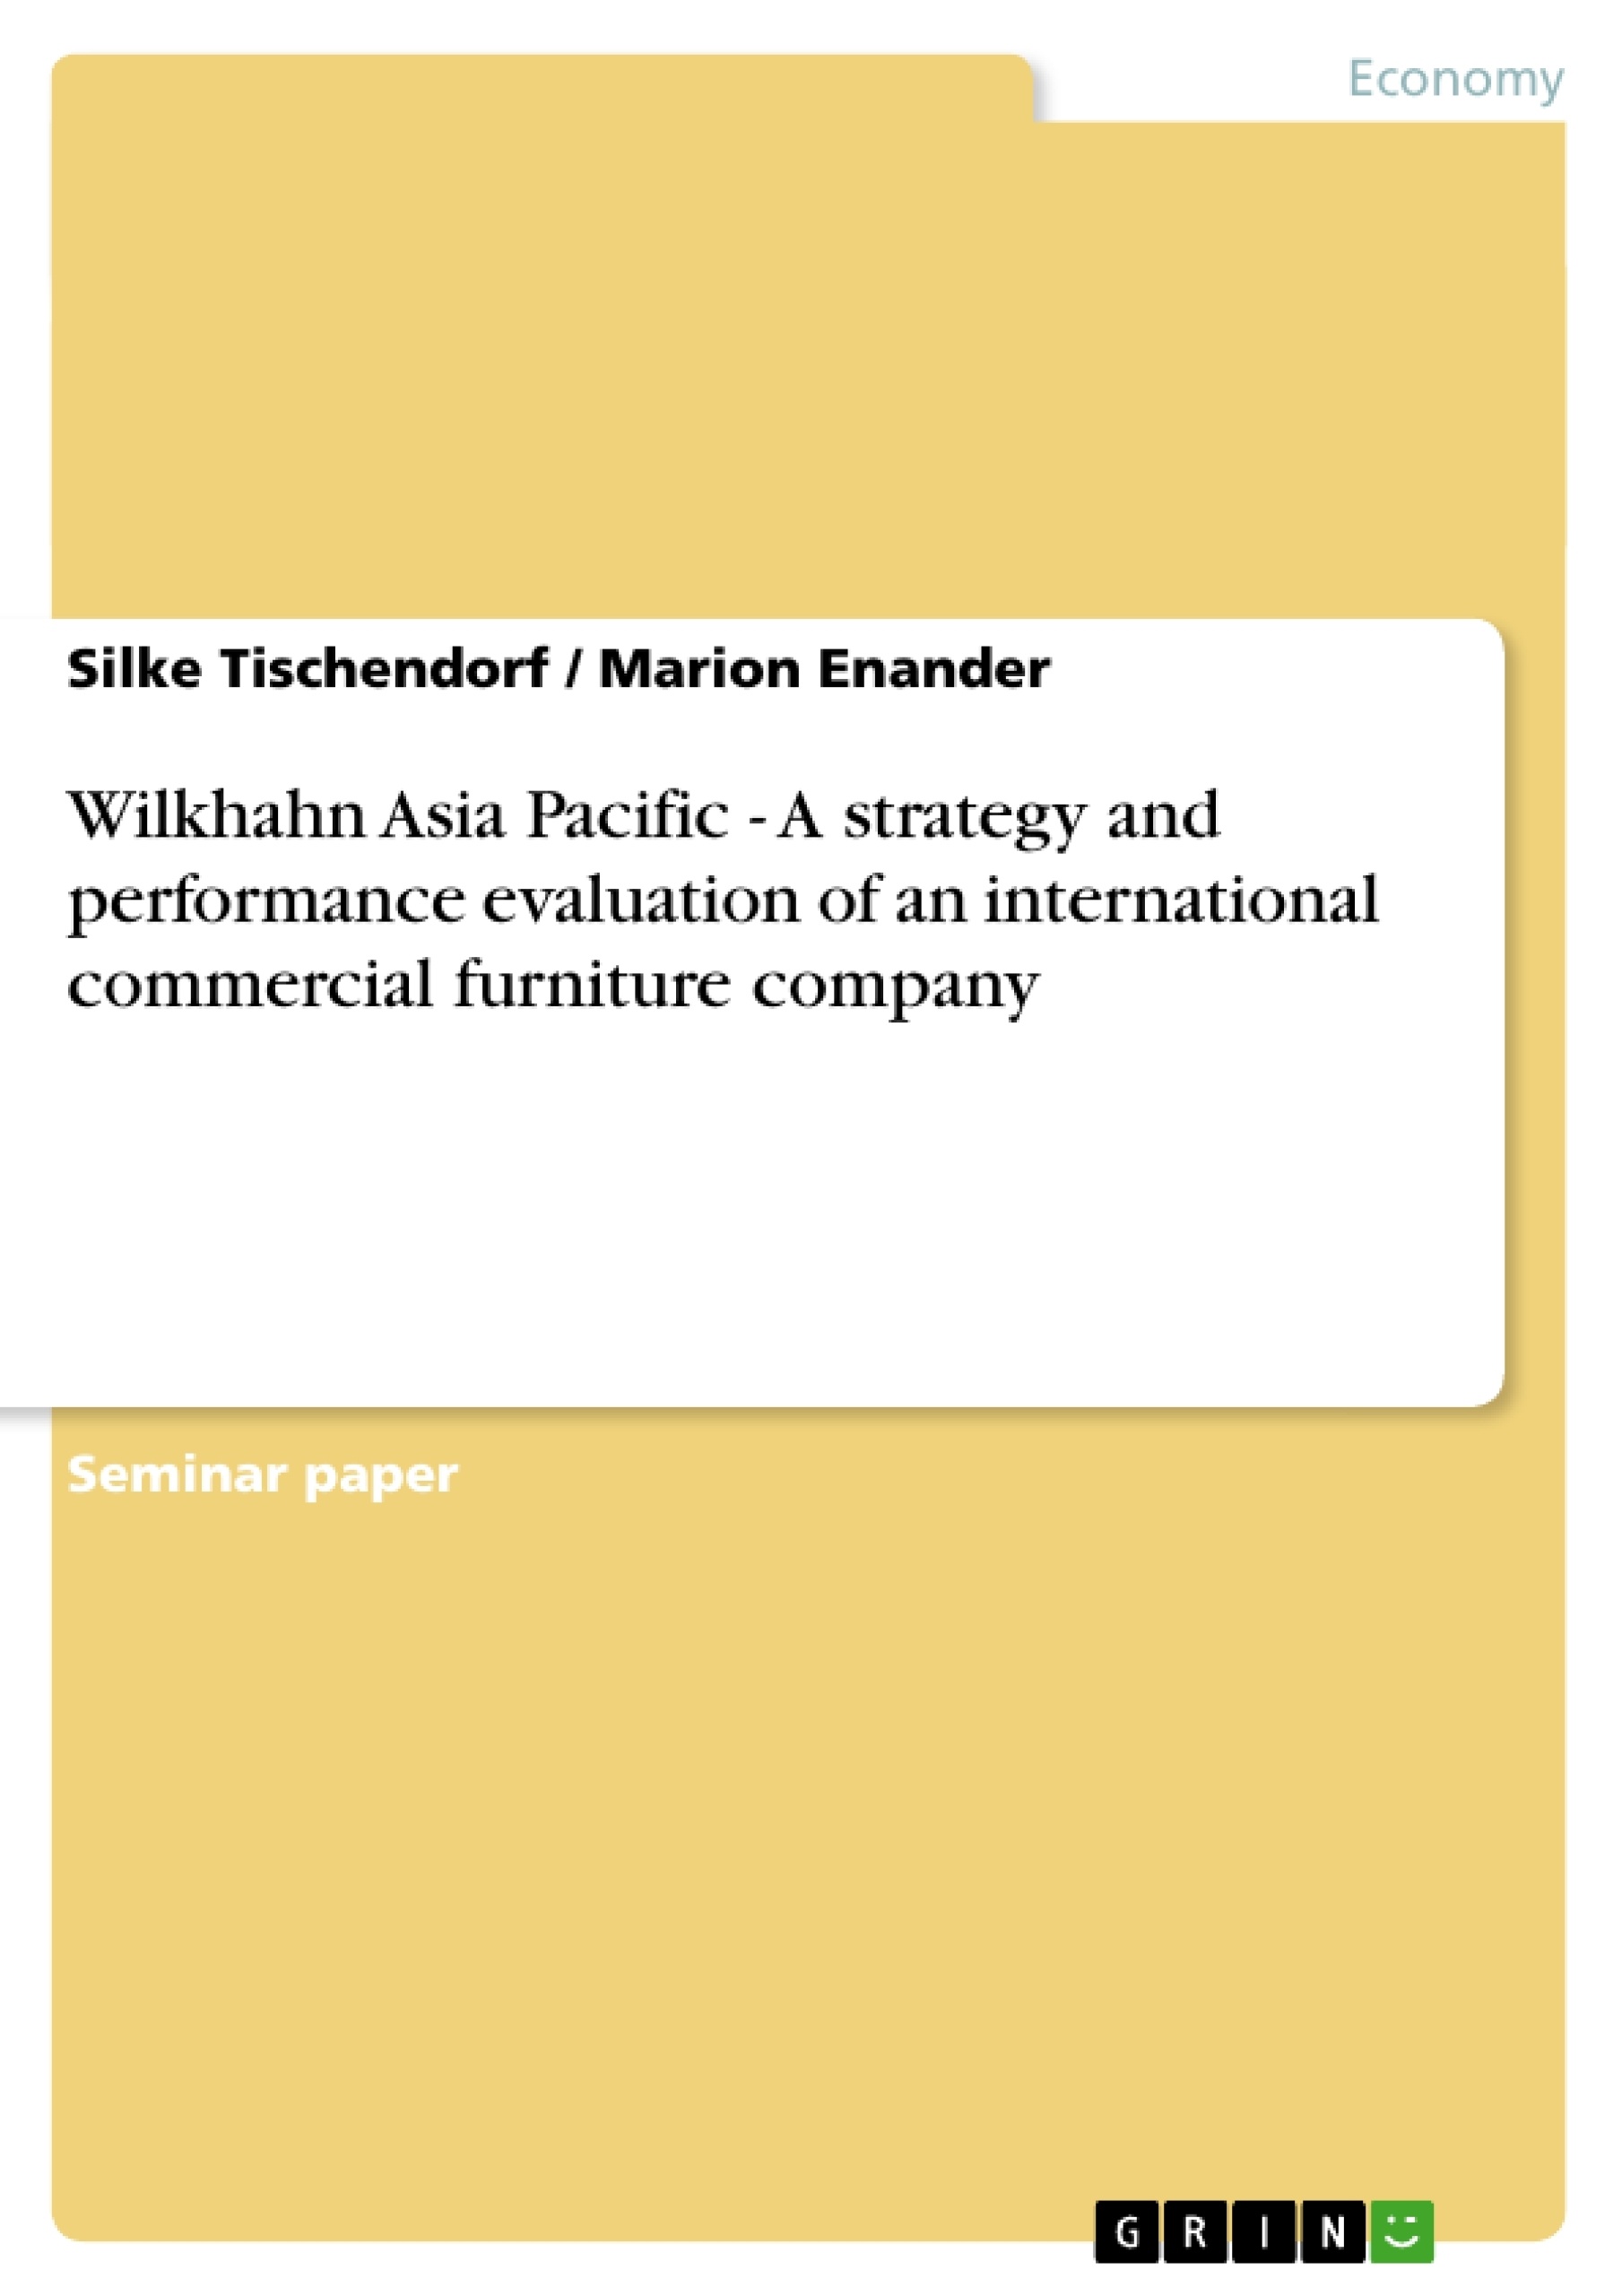 Titre: Wilkhahn Asia Pacific - A strategy and performance evaluation of an international commercial furniture company